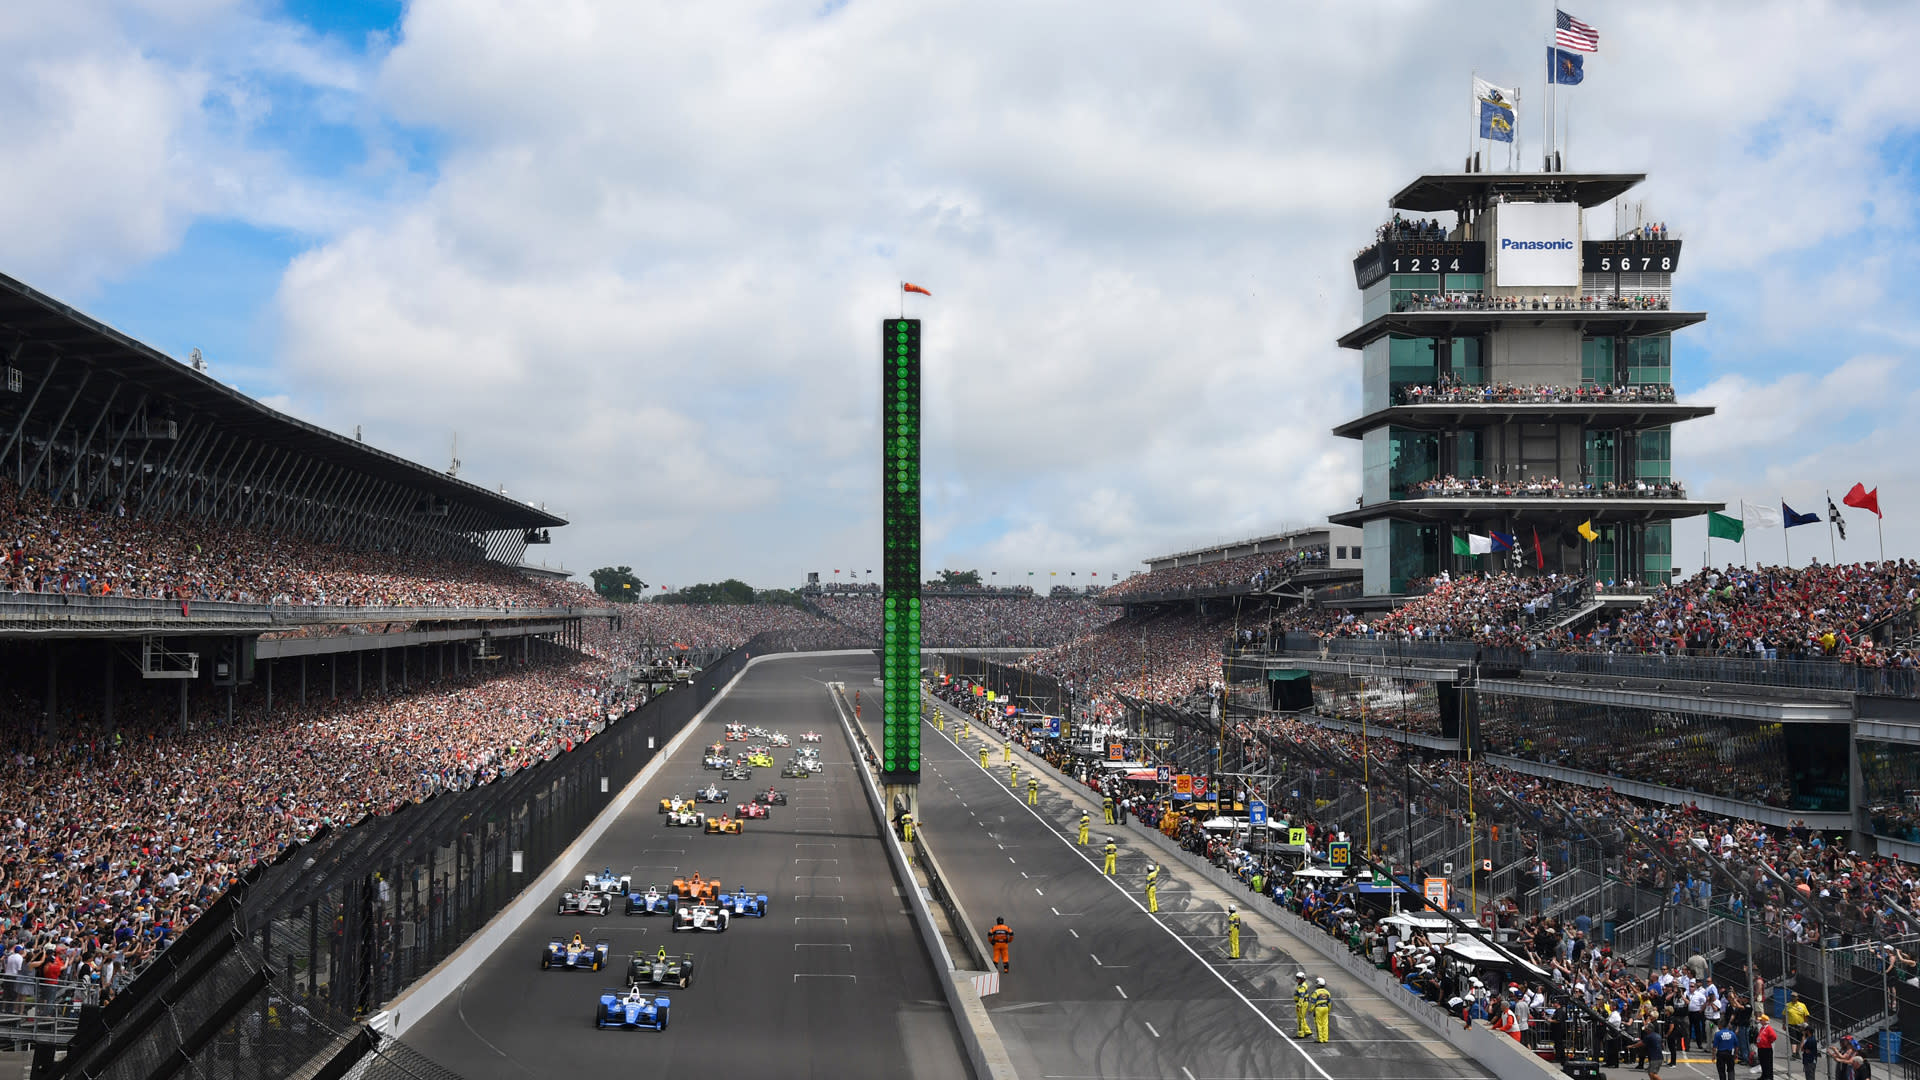 Indy 500 at the Indianapolis Motor Speedway